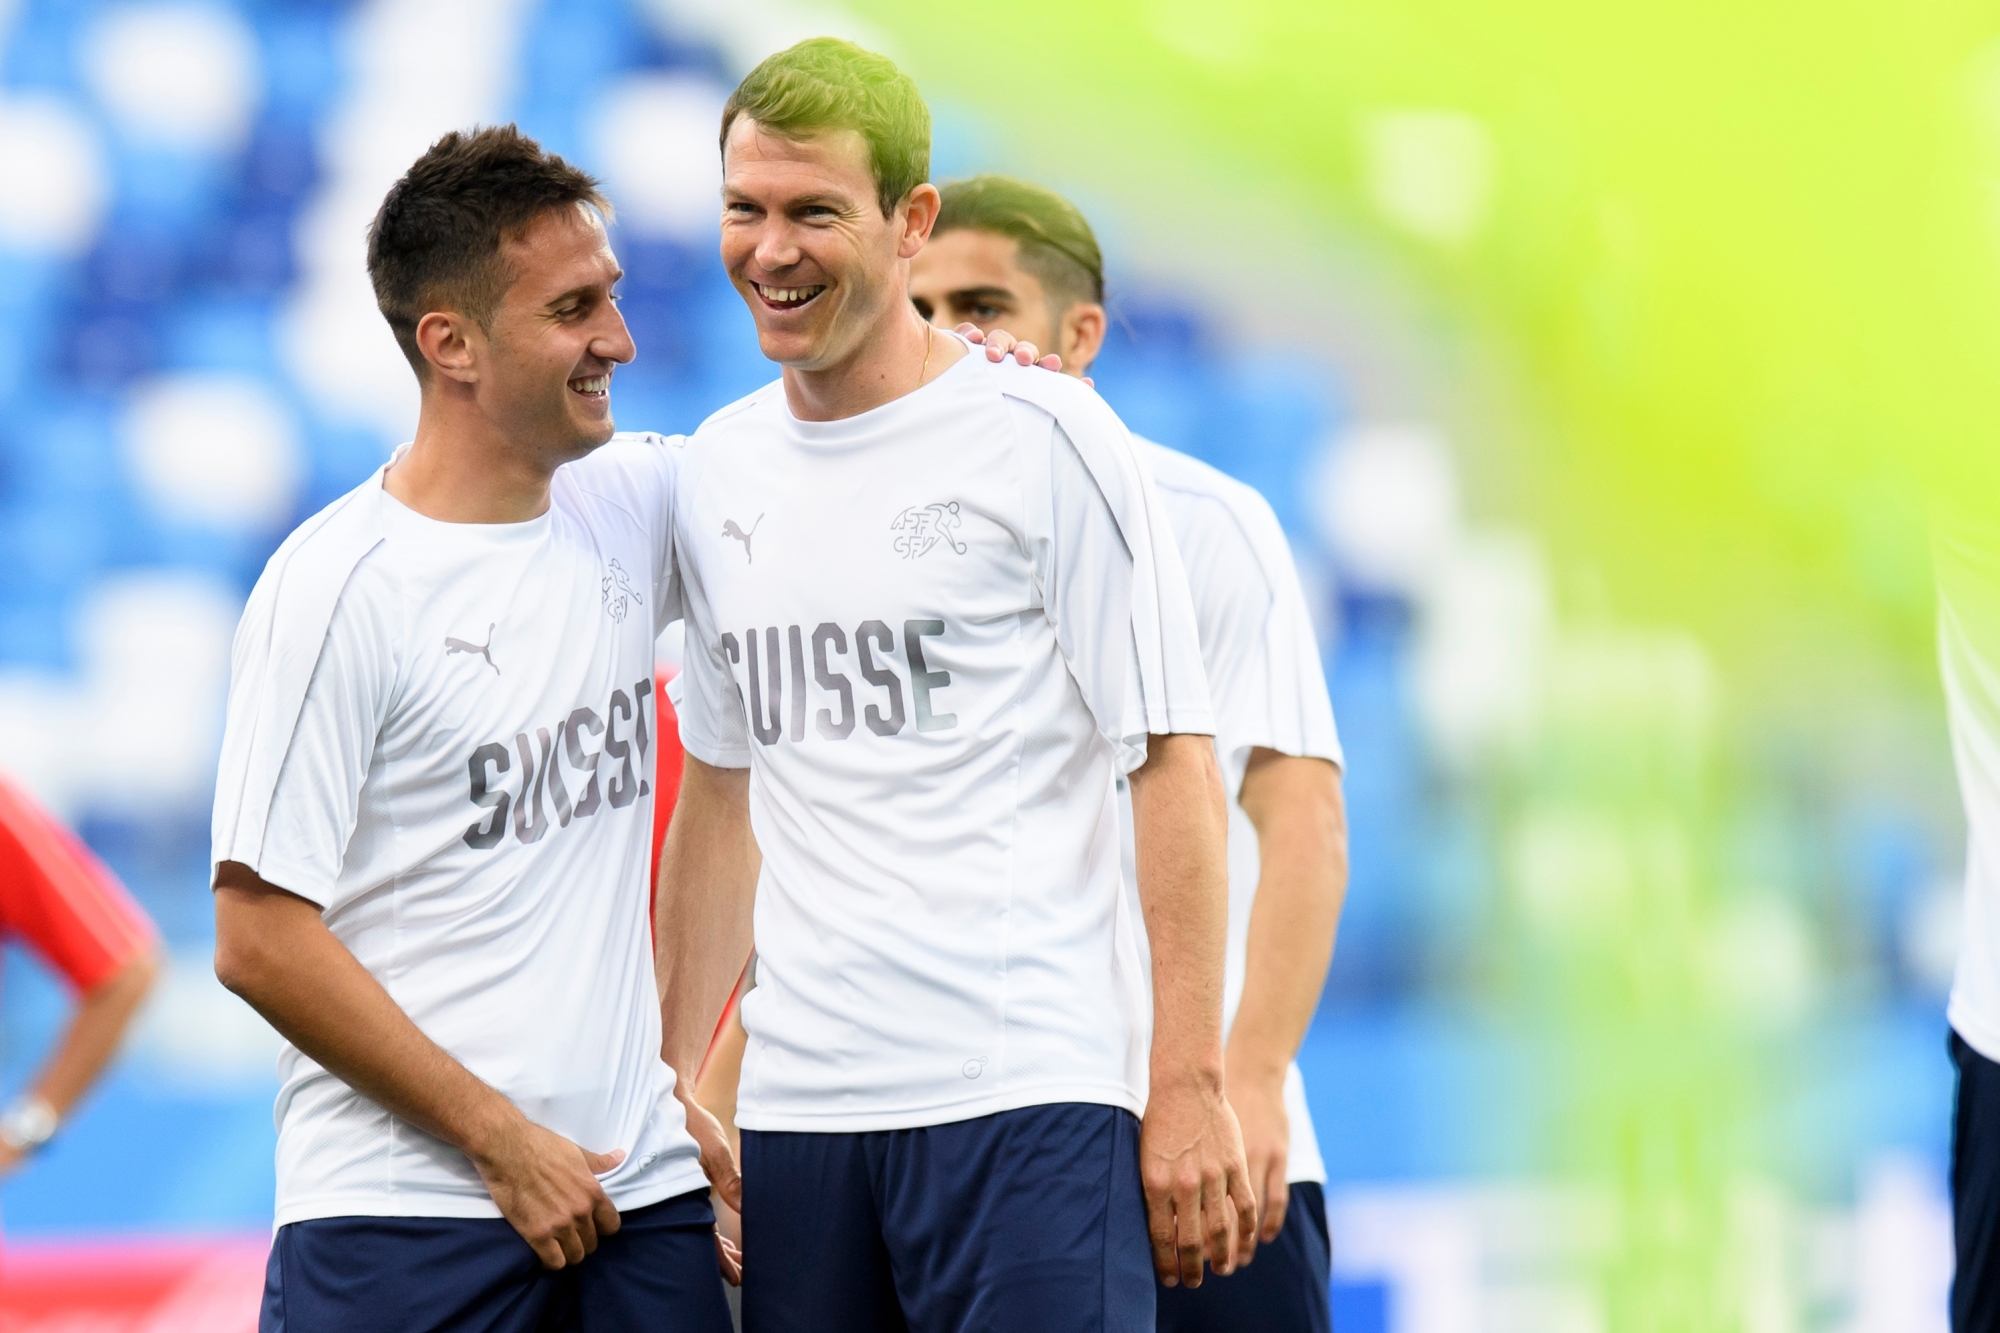 Switzerland's forward Mario Gavranovic, left, and Switzerland's defender Stephan Lichtsteiner, right, smile during a training session on the eve of the FIFA World Cup 2018 group E preliminary round soccer match between Switzerland and Costa Rica at the Nizhny Novgorod Stadium, in Nizhny Novgorod, Russia, Tuesday, June 26, 2018. (KEYSTONE/Laurent Gillieron) RUSSIA SOCCER FIFA WORLD CUP 2018 SWITZERLAND